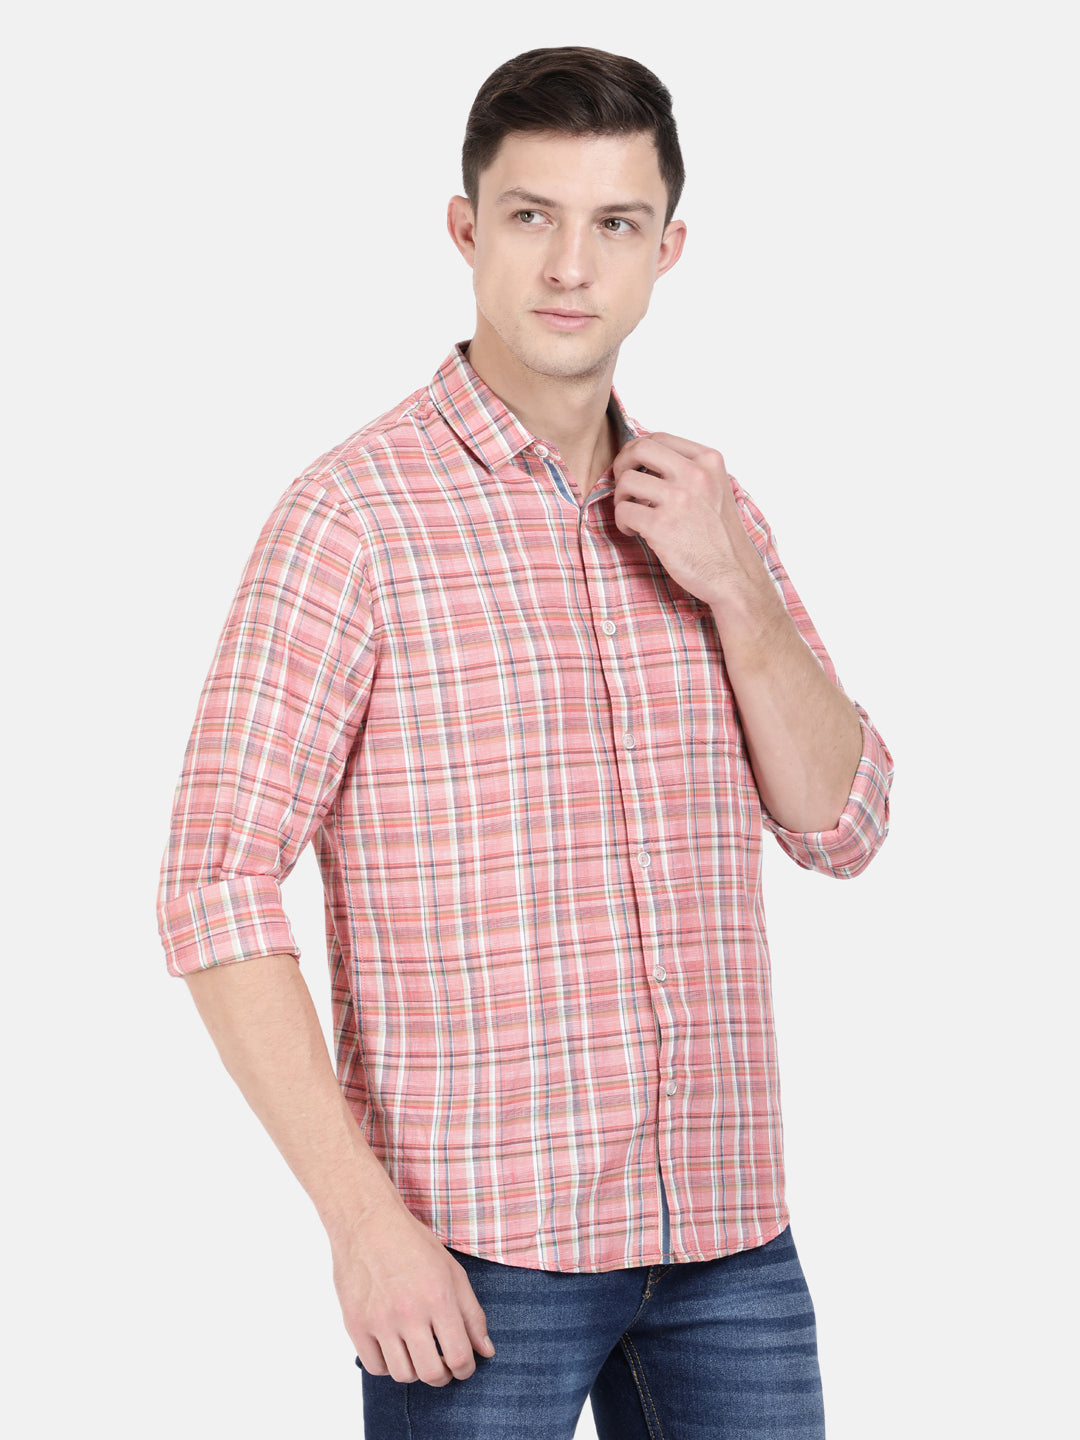 Casual Full Sleeve Comfort Fit Checks Light Red With Collar Shirt For Men